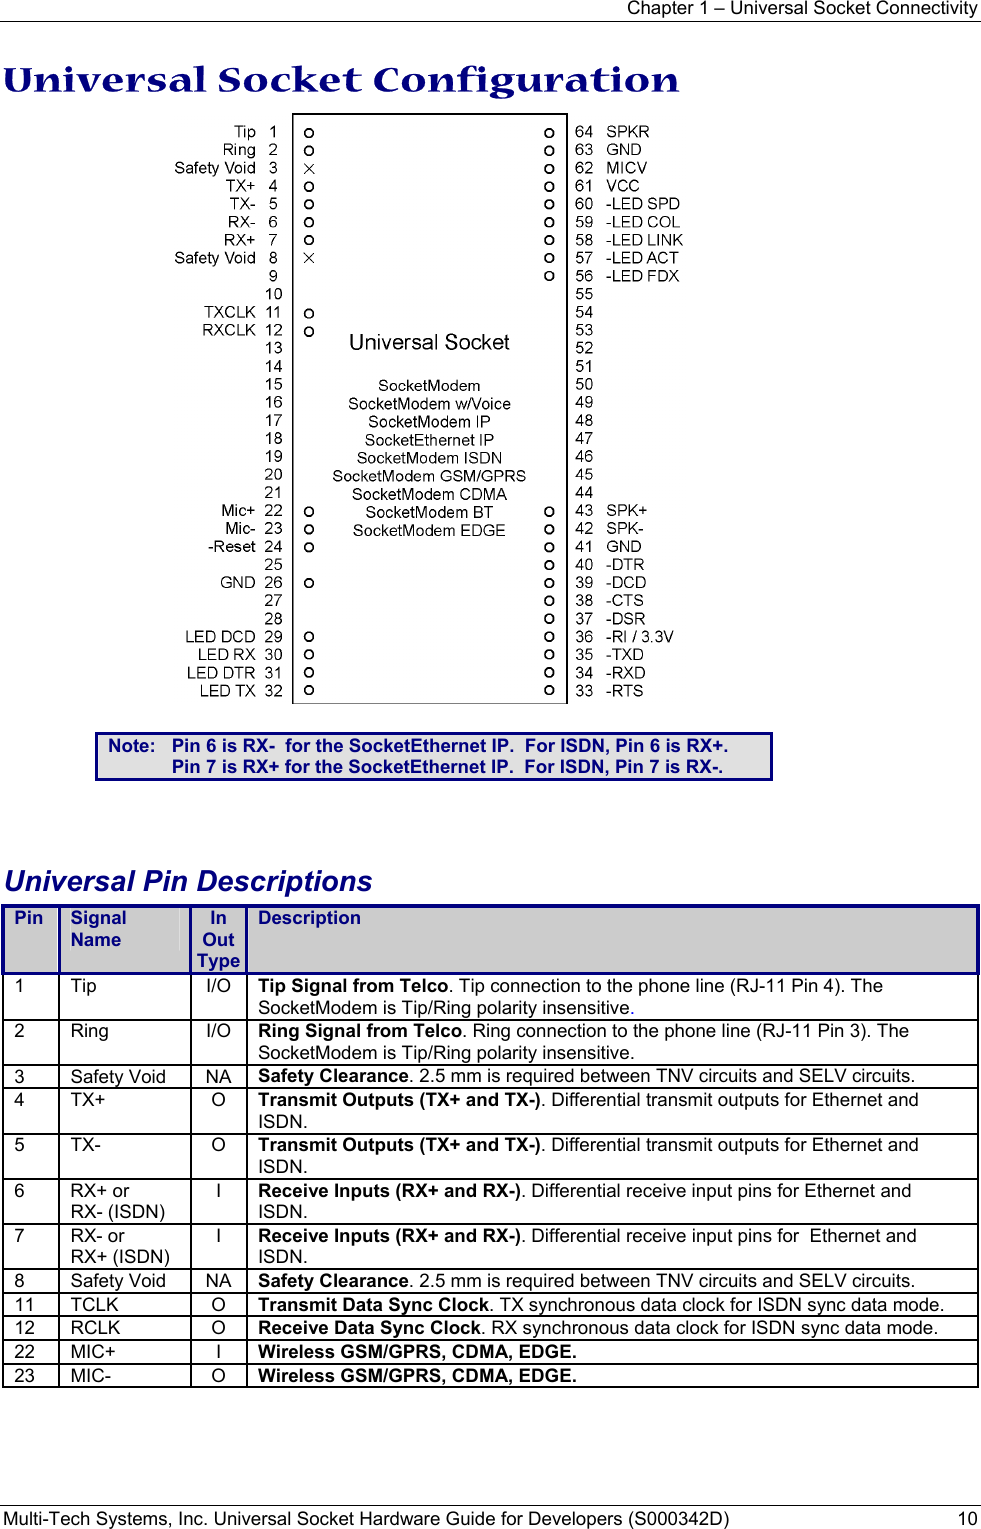 Chapter 1 – Universal Socket Connectivity Multi-Tech Systems, Inc. Universal Socket Hardware Guide for Developers (S000342D)  10  Universal Socket Configuration   Note:   Pin 6 is RX-  for the SocketEthernet IP.  For ISDN, Pin 6 is RX+. Pin 7 is RX+ for the SocketEthernet IP.  For ISDN, Pin 7 is RX-.    Universal Pin Descriptions Pin  Signal Name In  Out Type Description 1 Tip  I/O Tip Signal from Telco. Tip connection to the phone line (RJ-11 Pin 4). The SocketModem is Tip/Ring polarity insensitive. 2 Ring  I/O Ring Signal from Telco. Ring connection to the phone line (RJ-11 Pin 3). The SocketModem is Tip/Ring polarity insensitive. 3 Safety Void NA Safety Clearance. 2.5 mm is required between TNV circuits and SELV circuits. 4 TX+  O Transmit Outputs (TX+ and TX-). Differential transmit outputs for Ethernet and ISDN. 5 TX-  O Transmit Outputs (TX+ and TX-). Differential transmit outputs for Ethernet and ISDN. 6 RX+ or RX- (ISDN) I  Receive Inputs (RX+ and RX-). Differential receive input pins for Ethernet and ISDN. 7 RX- or RX+ (ISDN) I  Receive Inputs (RX+ and RX-). Differential receive input pins for  Ethernet and ISDN. 8 Safety Void NA Safety Clearance. 2.5 mm is required between TNV circuits and SELV circuits. 11 TCLK  O Transmit Data Sync Clock. TX synchronous data clock for ISDN sync data mode. 12 RCLK  O Receive Data Sync Clock. RX synchronous data clock for ISDN sync data mode. 22 MIC+  I Wireless GSM/GPRS, CDMA, EDGE. 23 MIC-  O Wireless GSM/GPRS, CDMA, EDGE. 